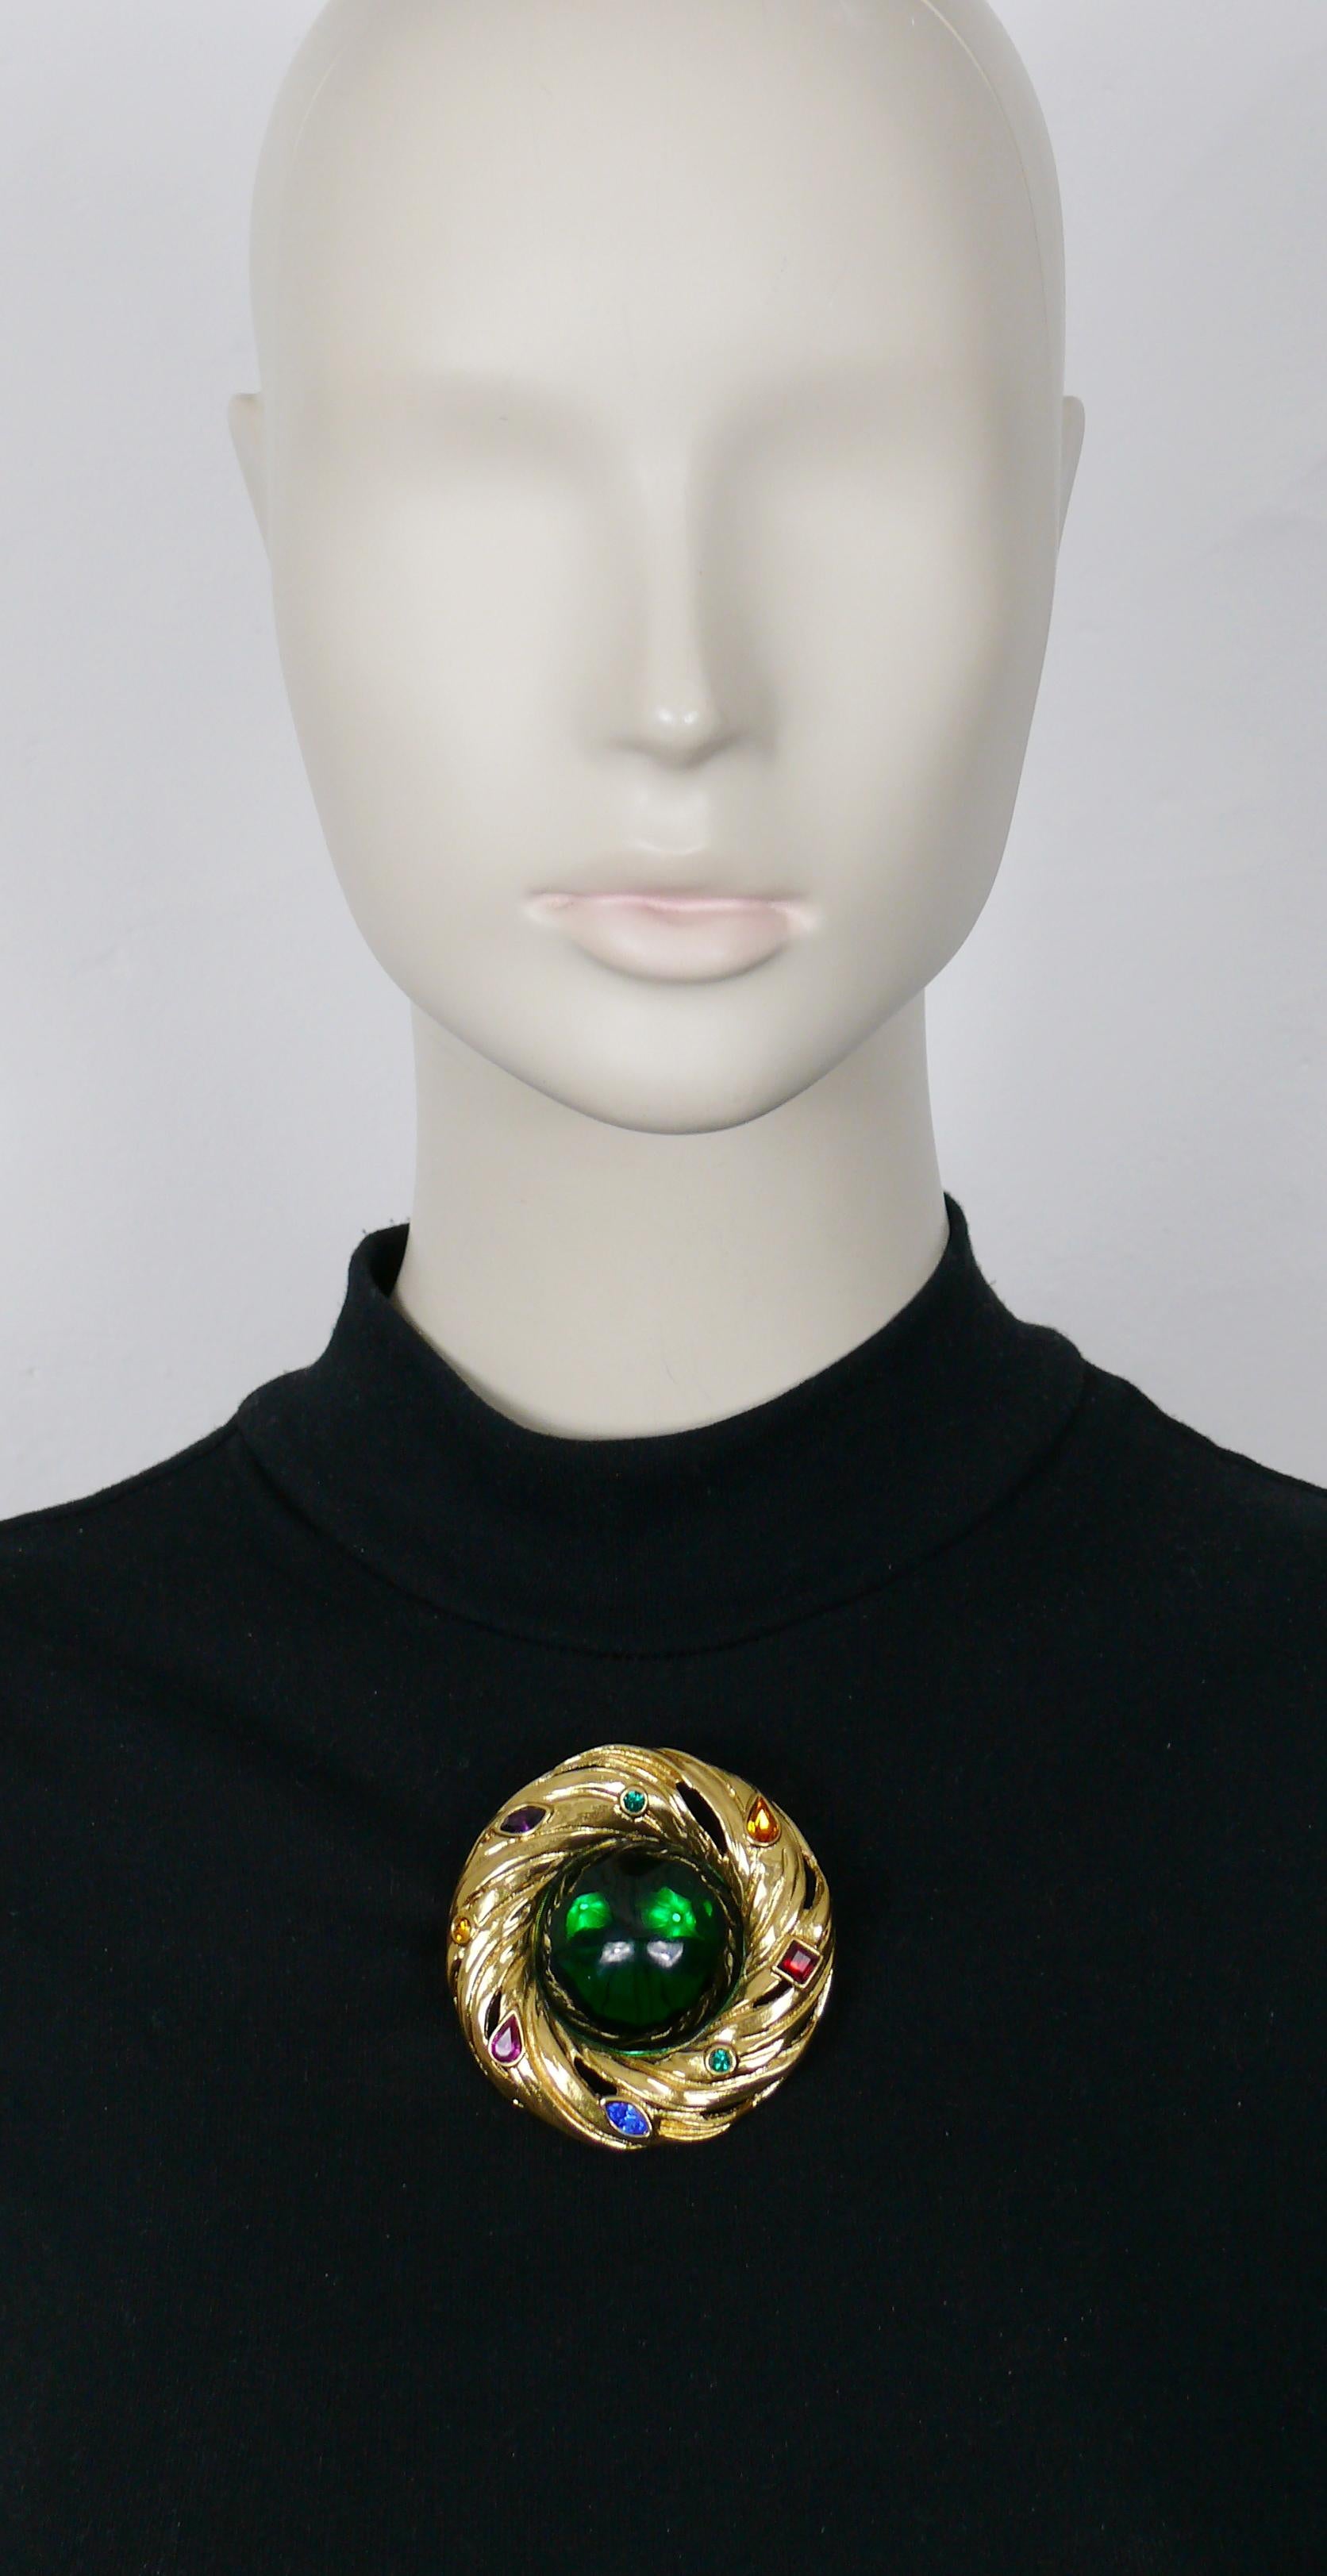 YVES SAINT LAURENT vintage massive gold tone nest design brooch/pendant embellished with a large irregular shaped green resin cabochon adorned with multicolored crystals.

Can be worn as a brooch or pendant.

Embossed YSL Made in France.

Indicative